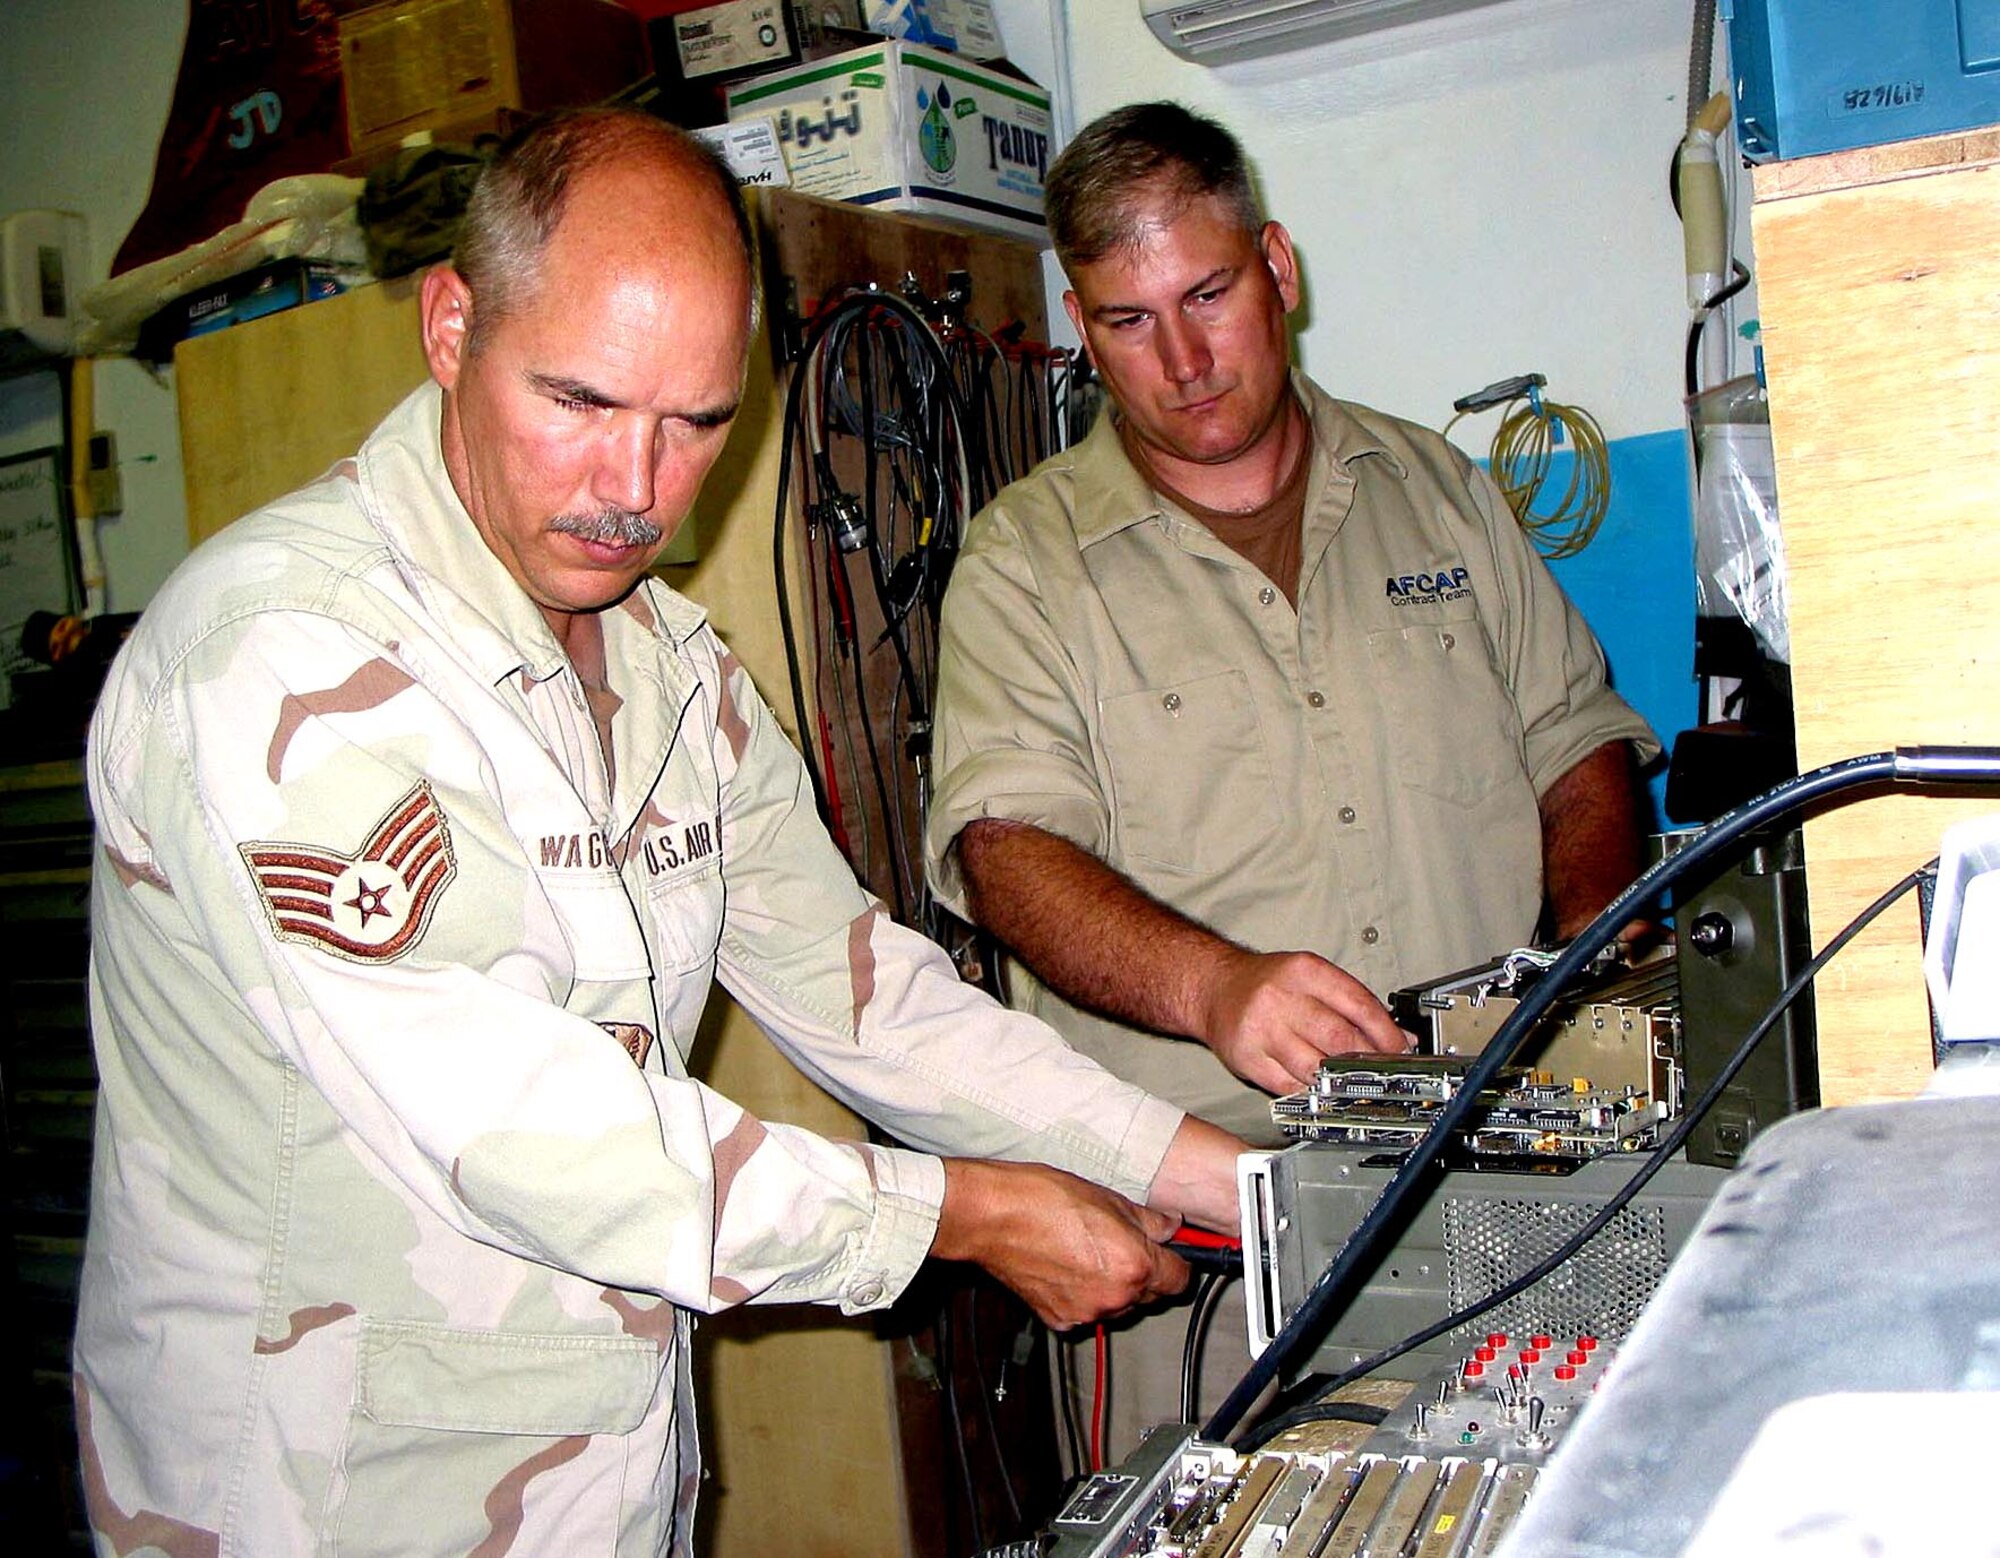 BAGRAM AIR BASE, Afghanistan - Staff Sgt. Brian Waggoner (left), 455th Airfield Operations Squadron, shows contractor Jeff Bryant the RT1319 radio used in the control tower here.  They are troubleshooting a maintenance problem with the radio used to talk to aircraft.  Bryant will replace Waggoner in September.  (U.S. Air Force photo by Staff Sgt. Russell Wicke)